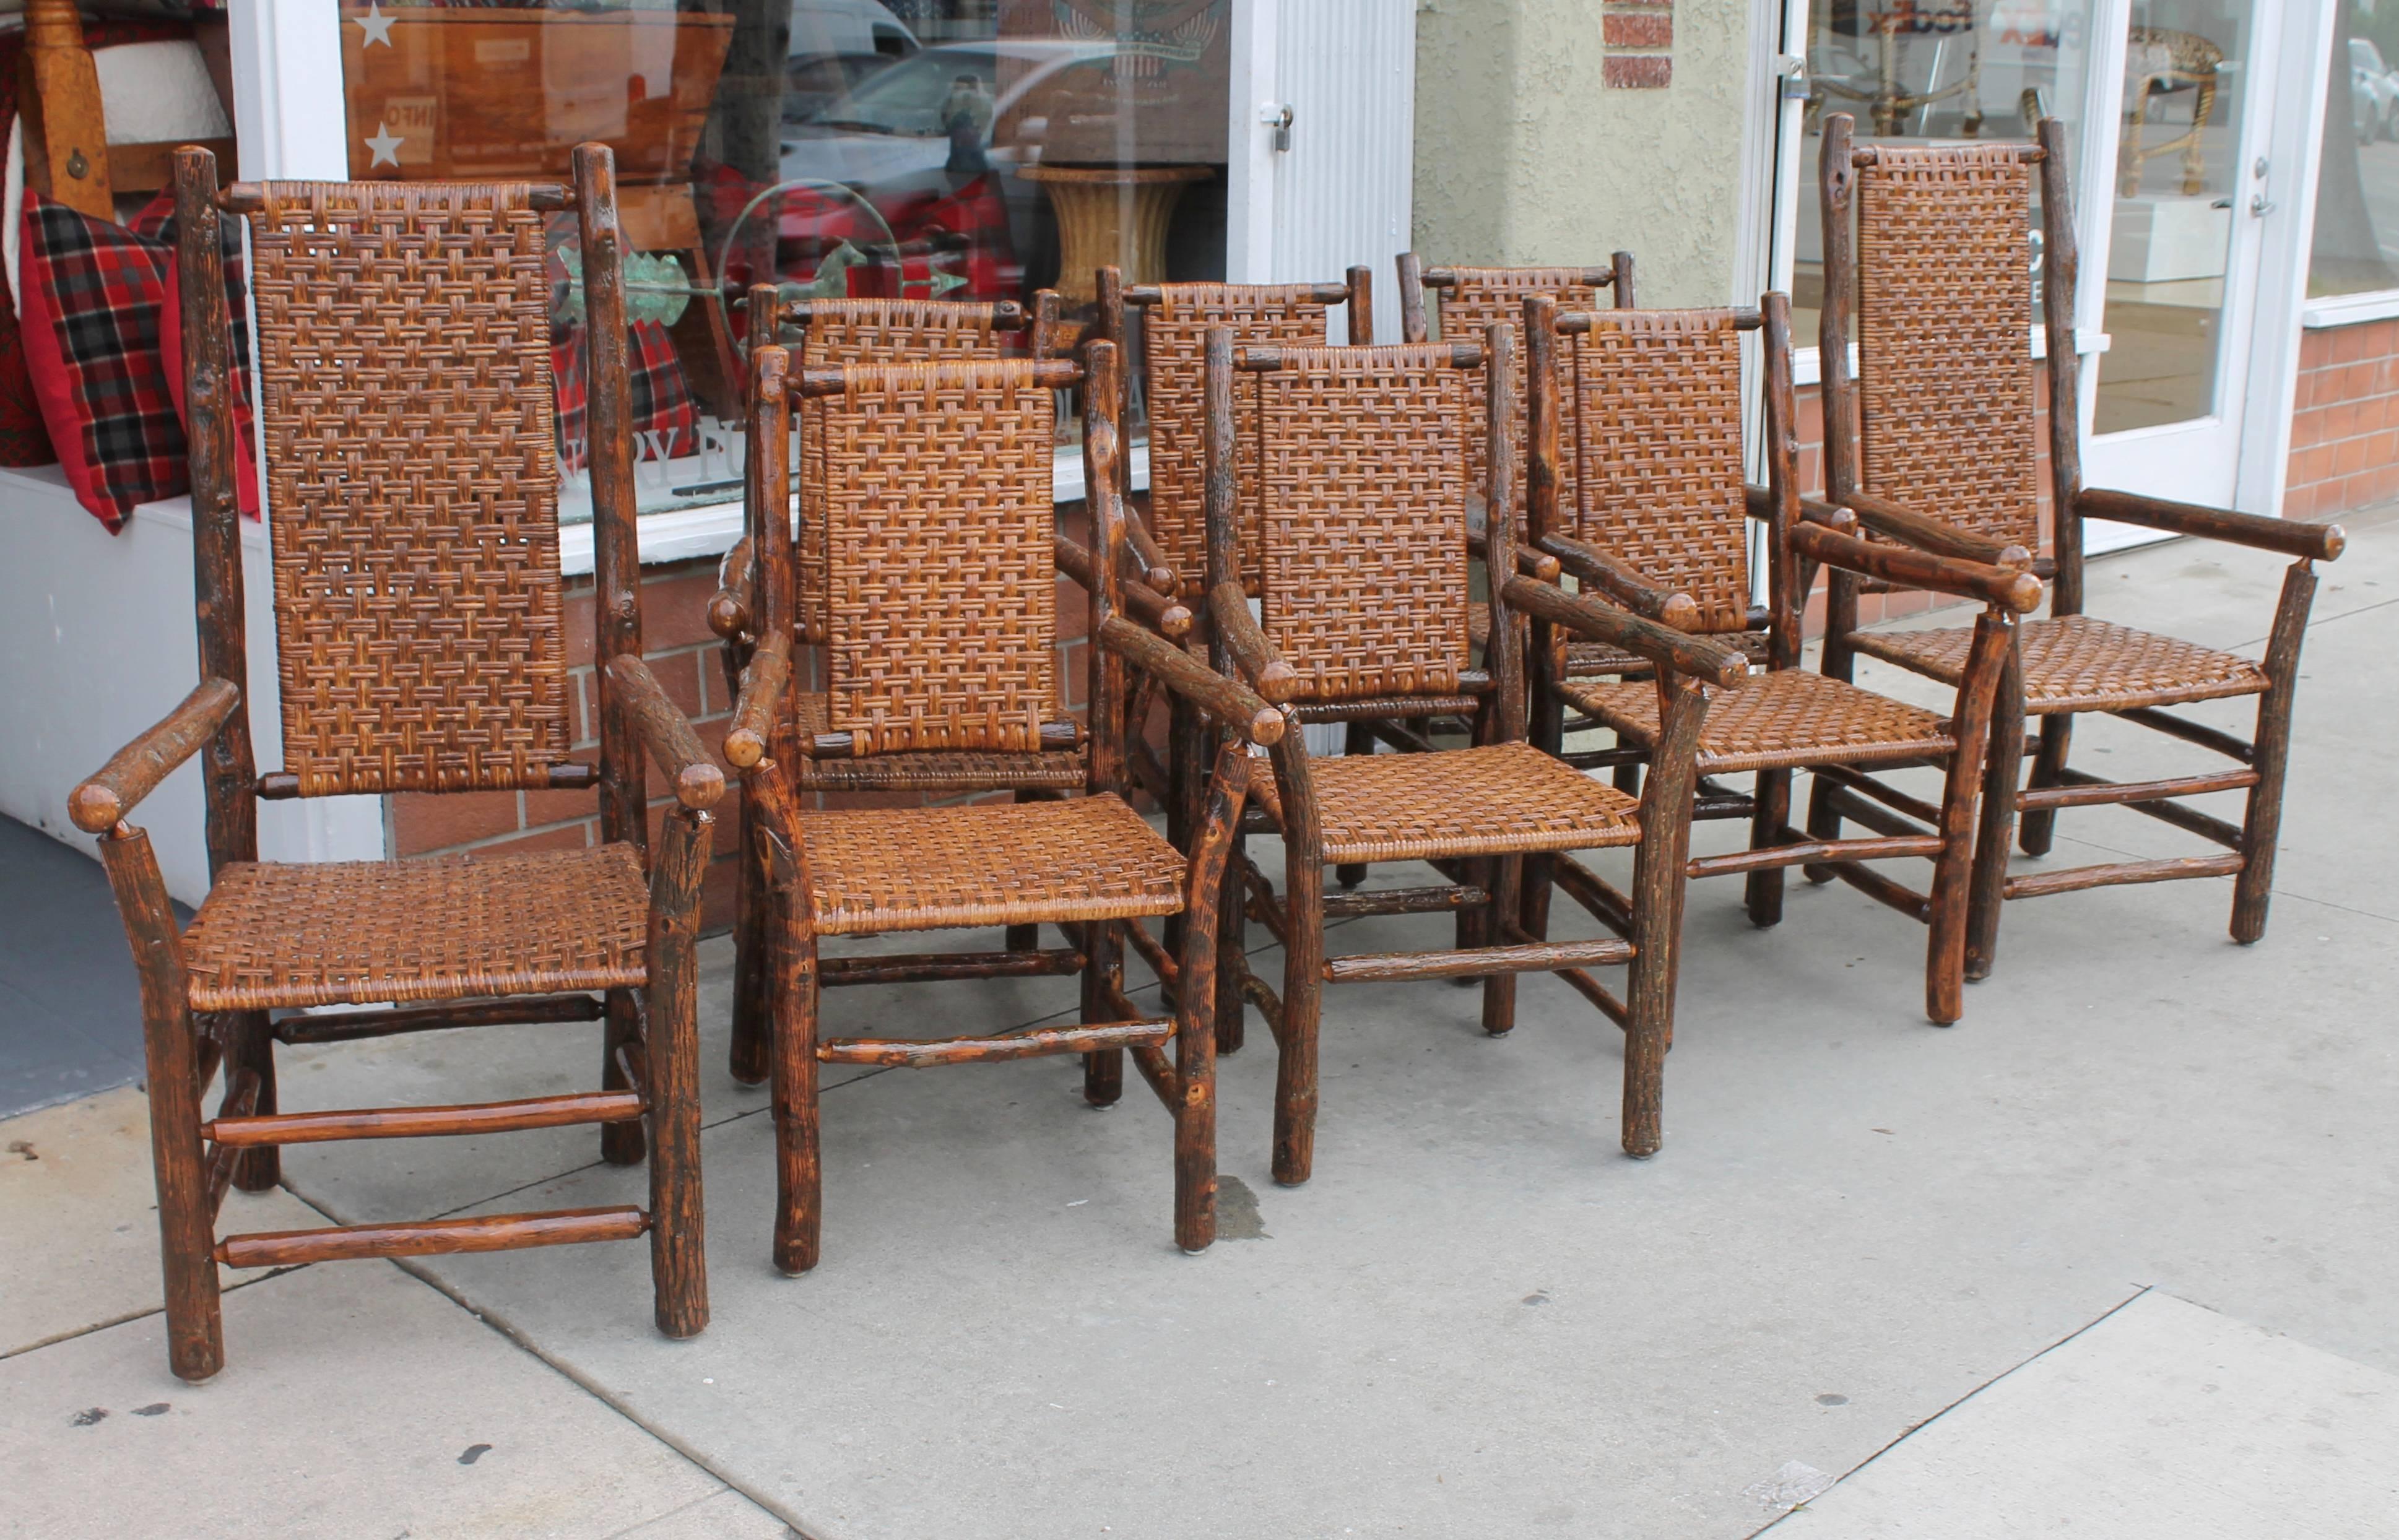 This fine collection of six regular dining chairs and two high back chairs are in fantastic condition. The handwoven caned seats and backs are in good condition as well. It is very rare to find a matching set and have the two head of table chairs.